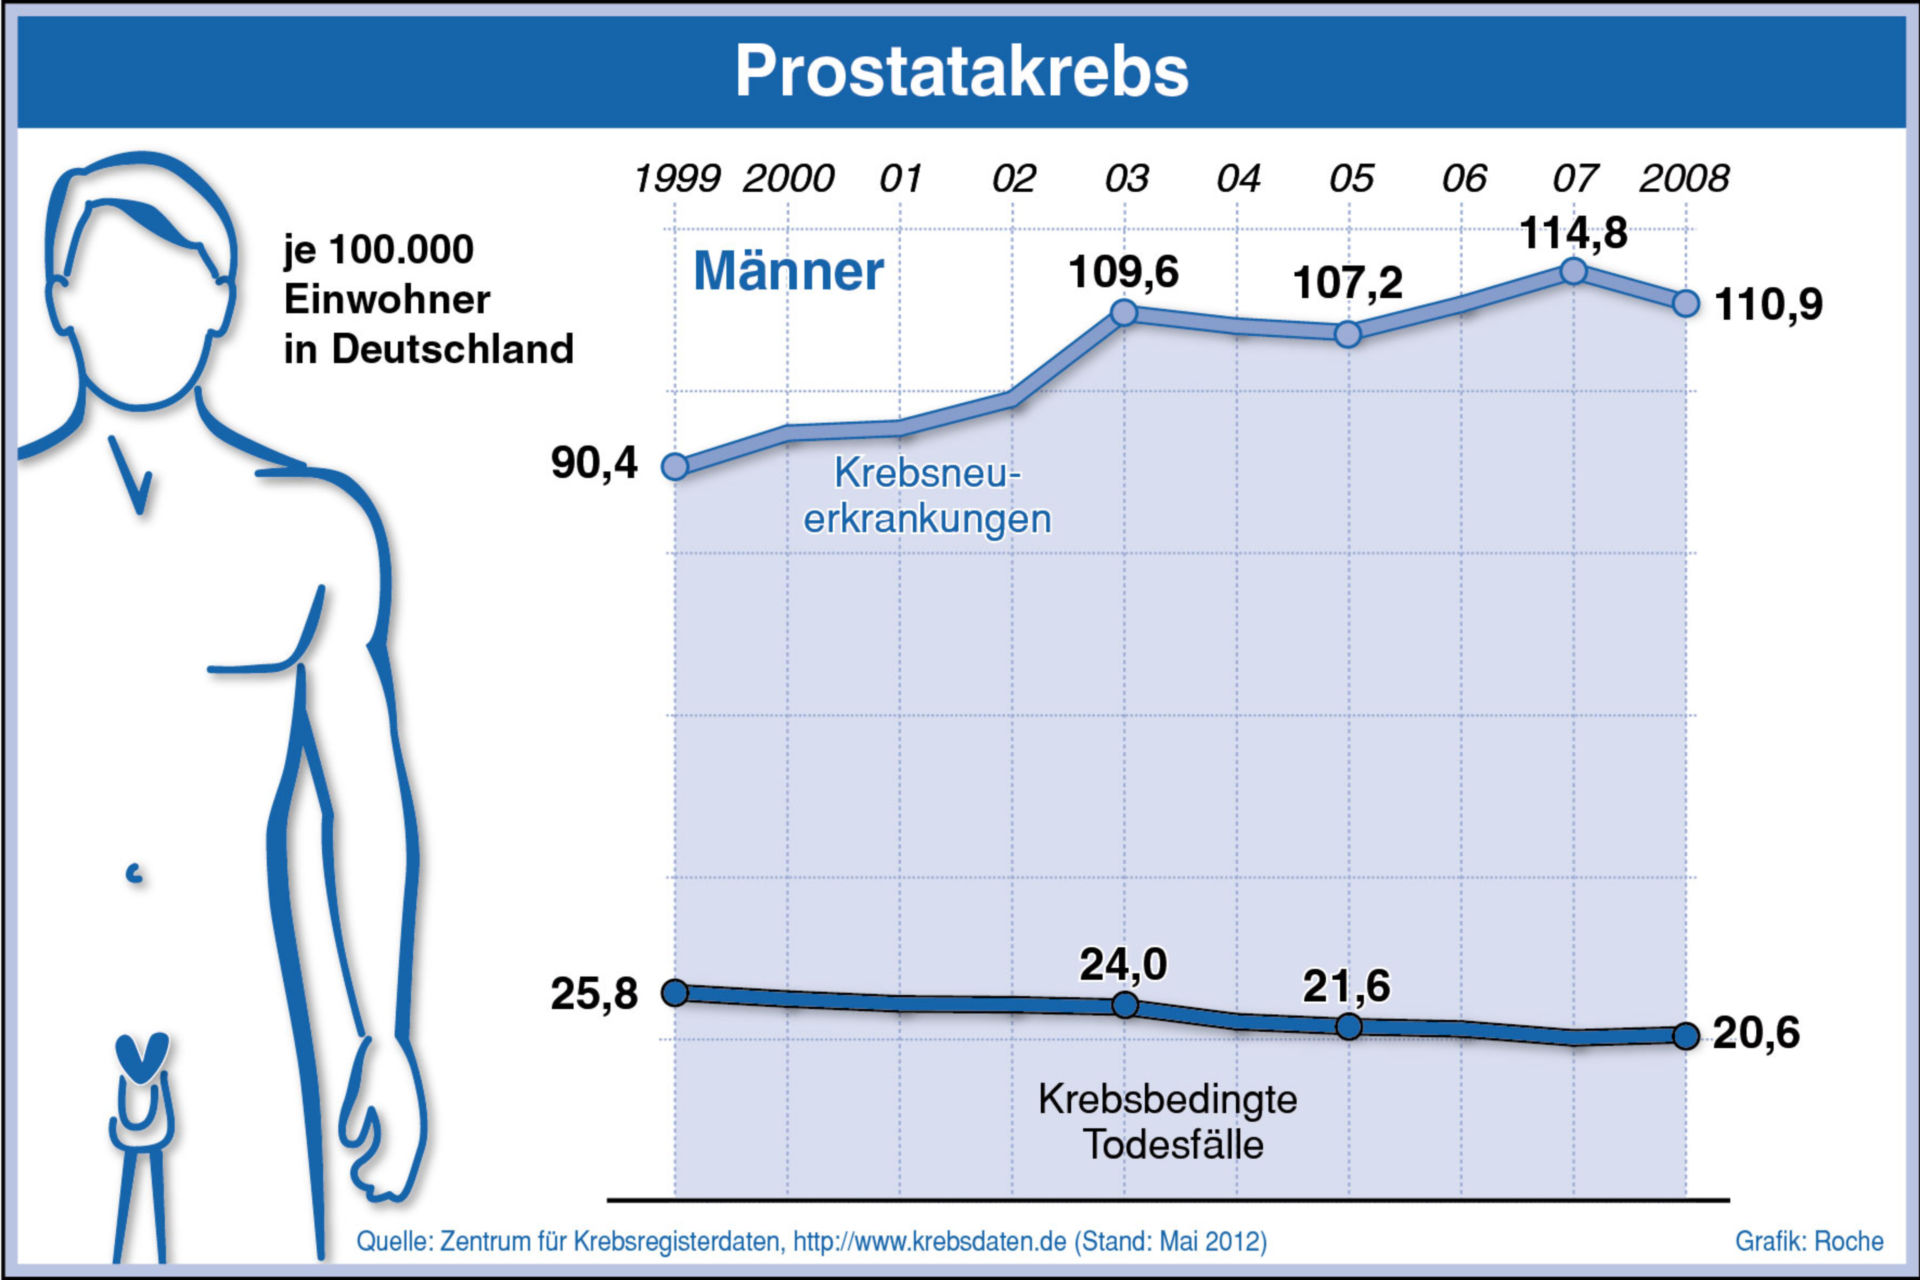 Incidence and mortality of prostate cancer in Germany